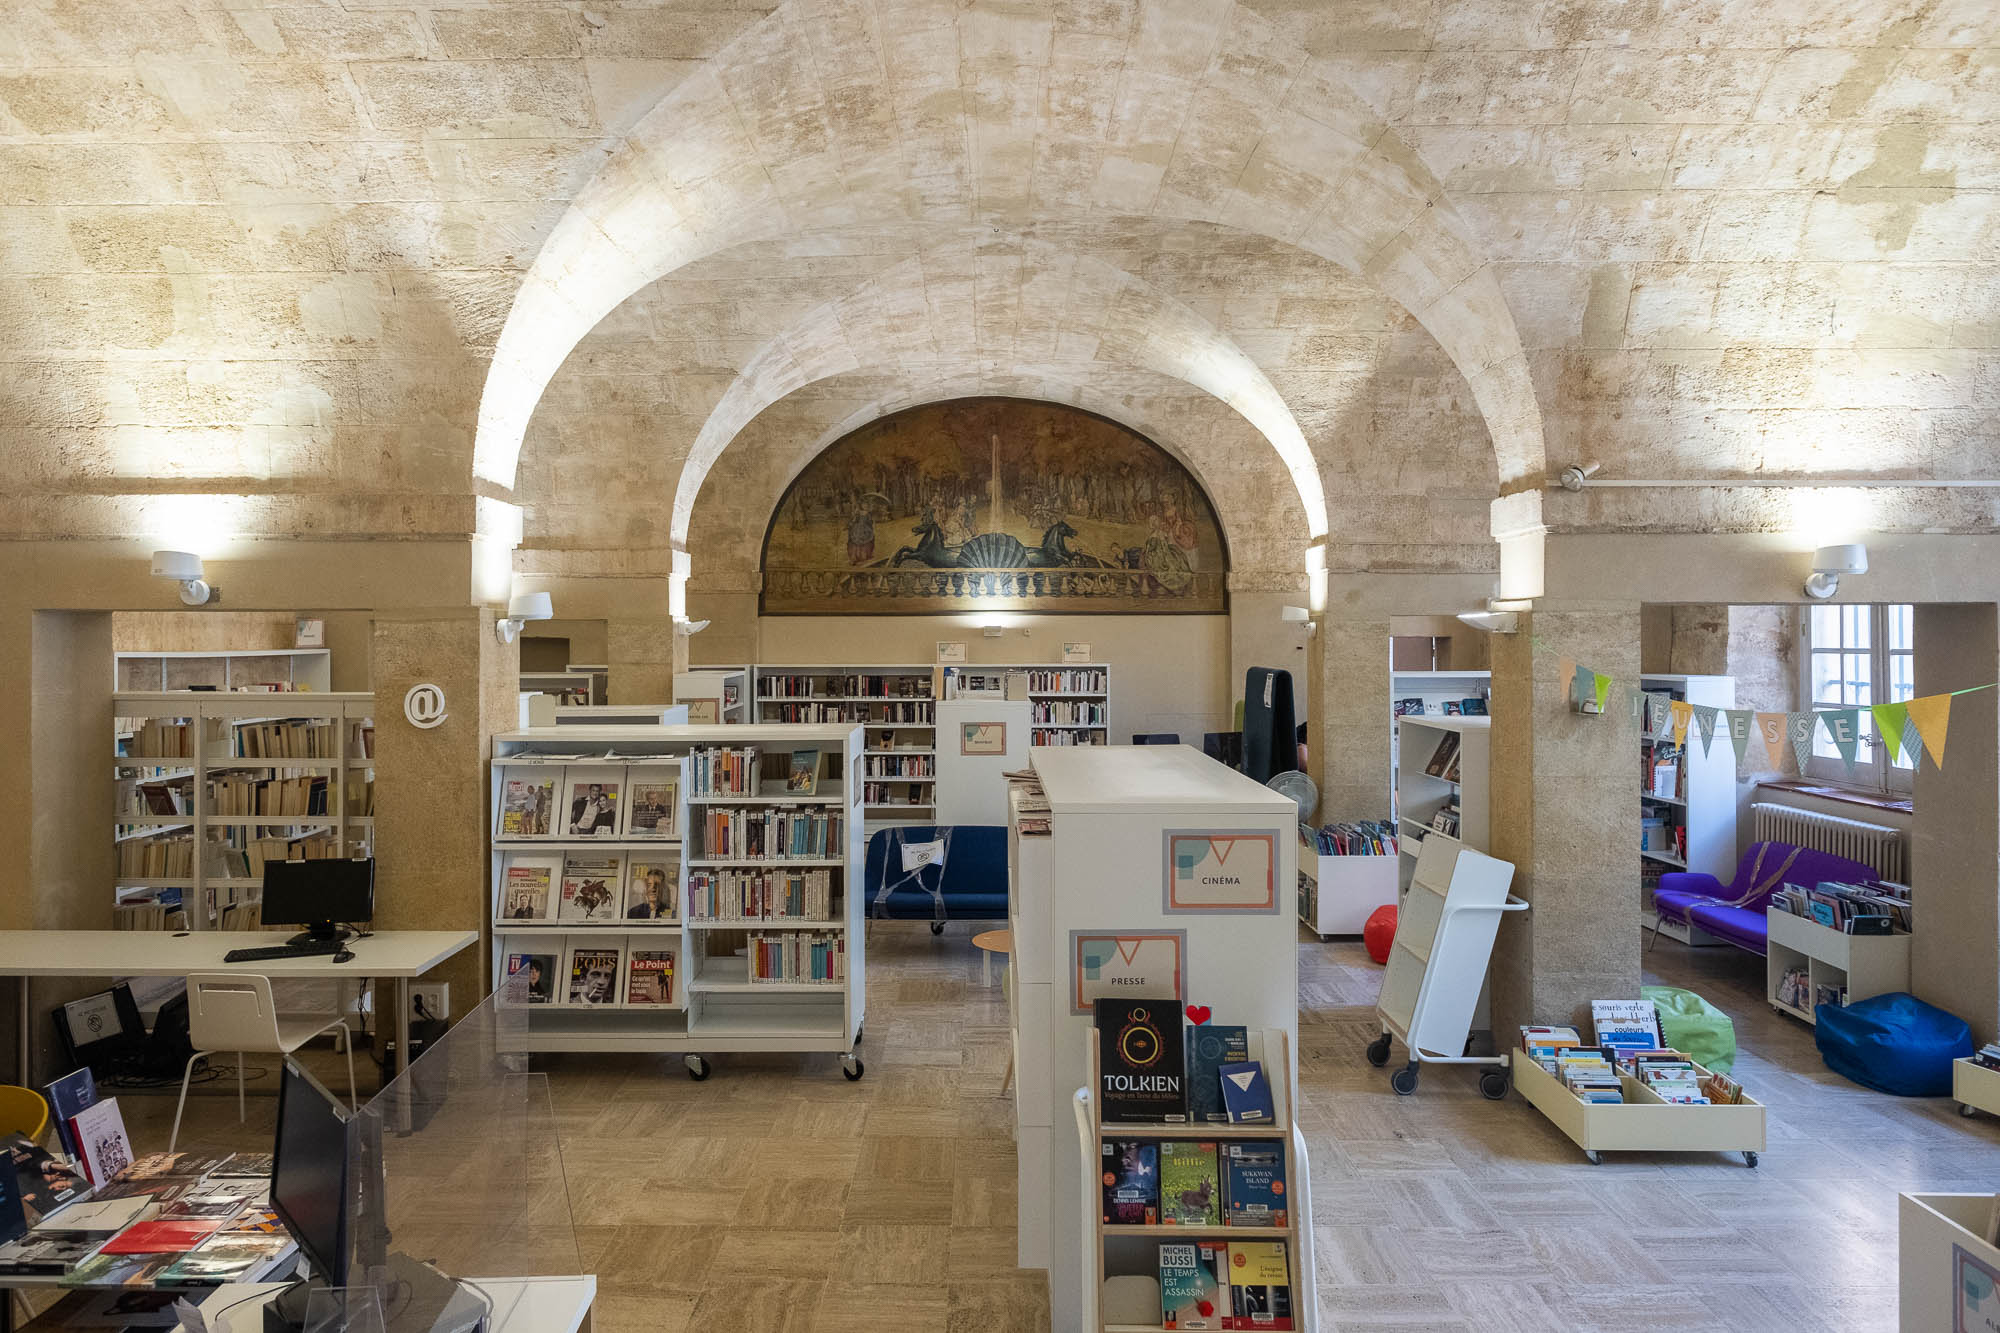 Interior of a library in a stone vaulted space. A fresco showing fountain with two horses and an avenue lined with trees is on the back wall.